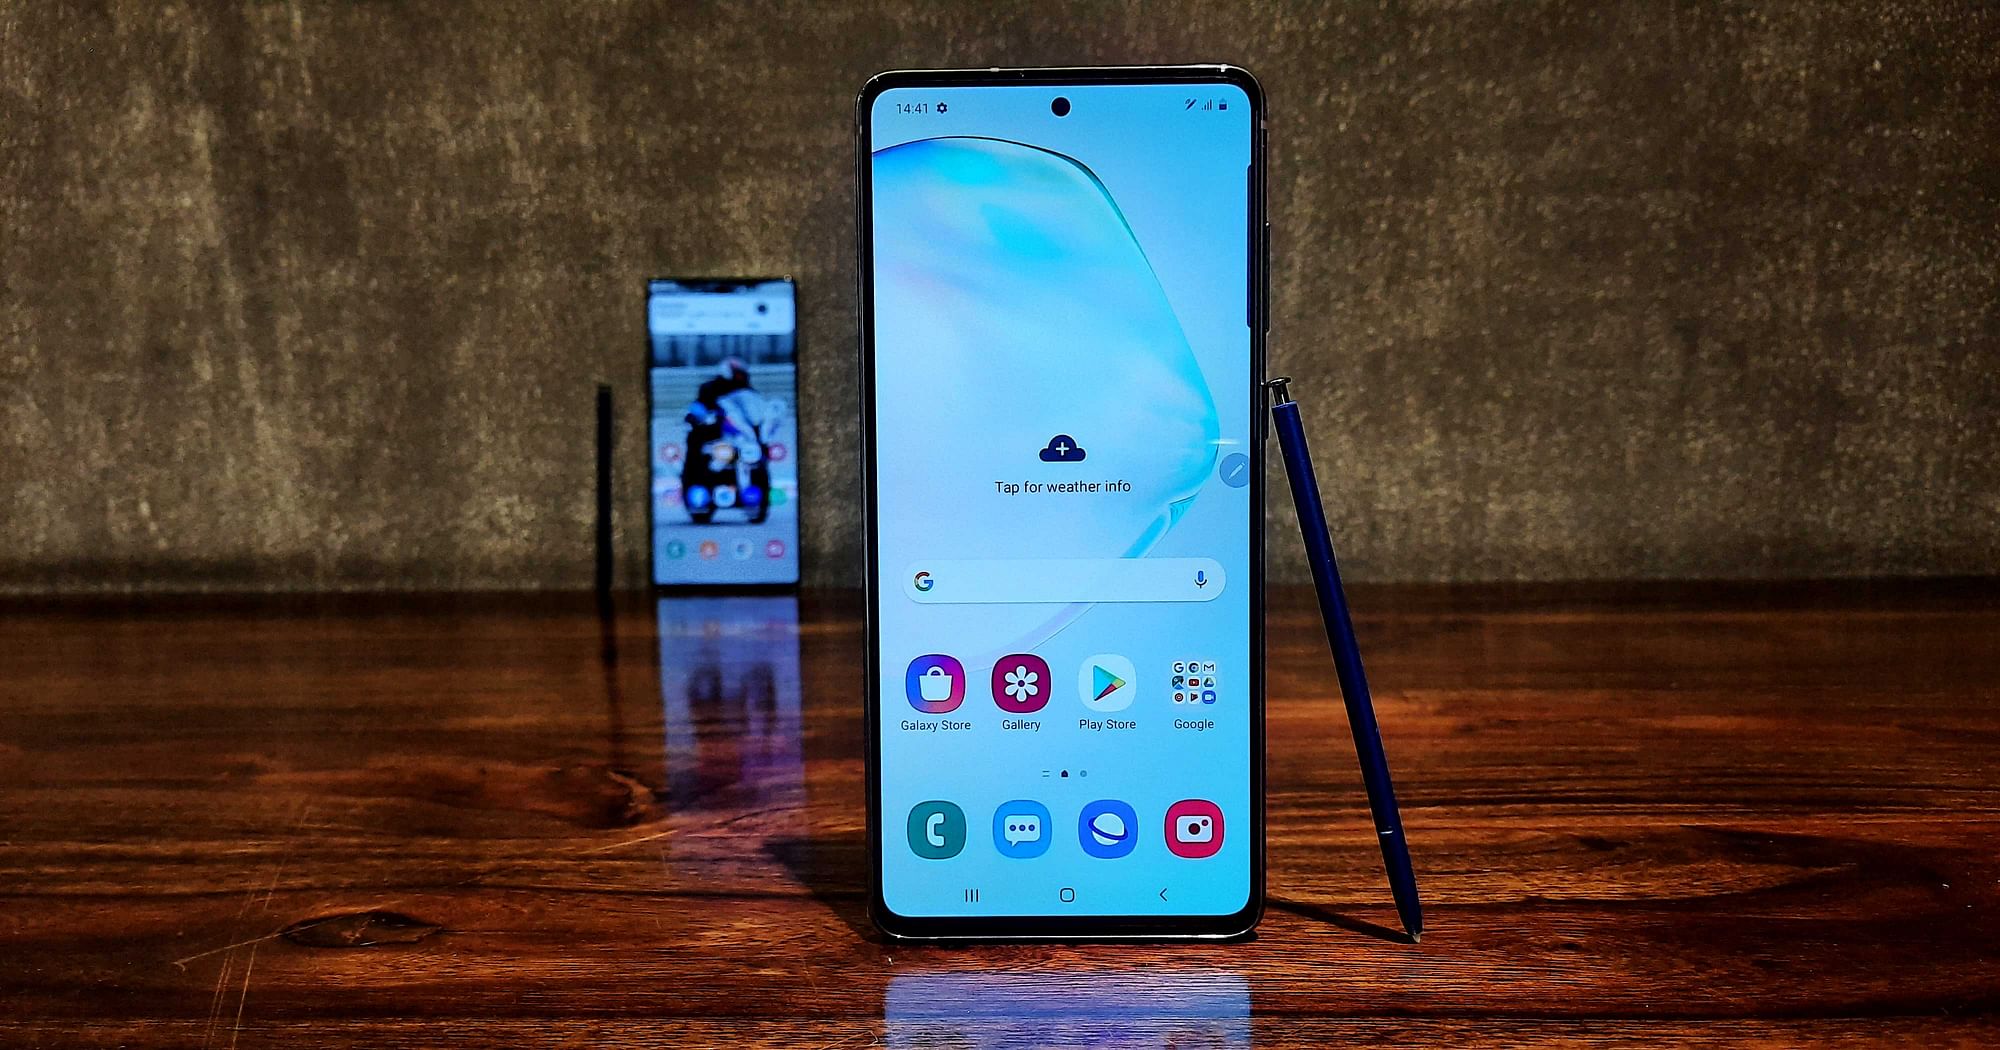 Samsung Galaxy Note 10 Lite First Look: Specifications, Details, Images,  Camera, Battery & More.